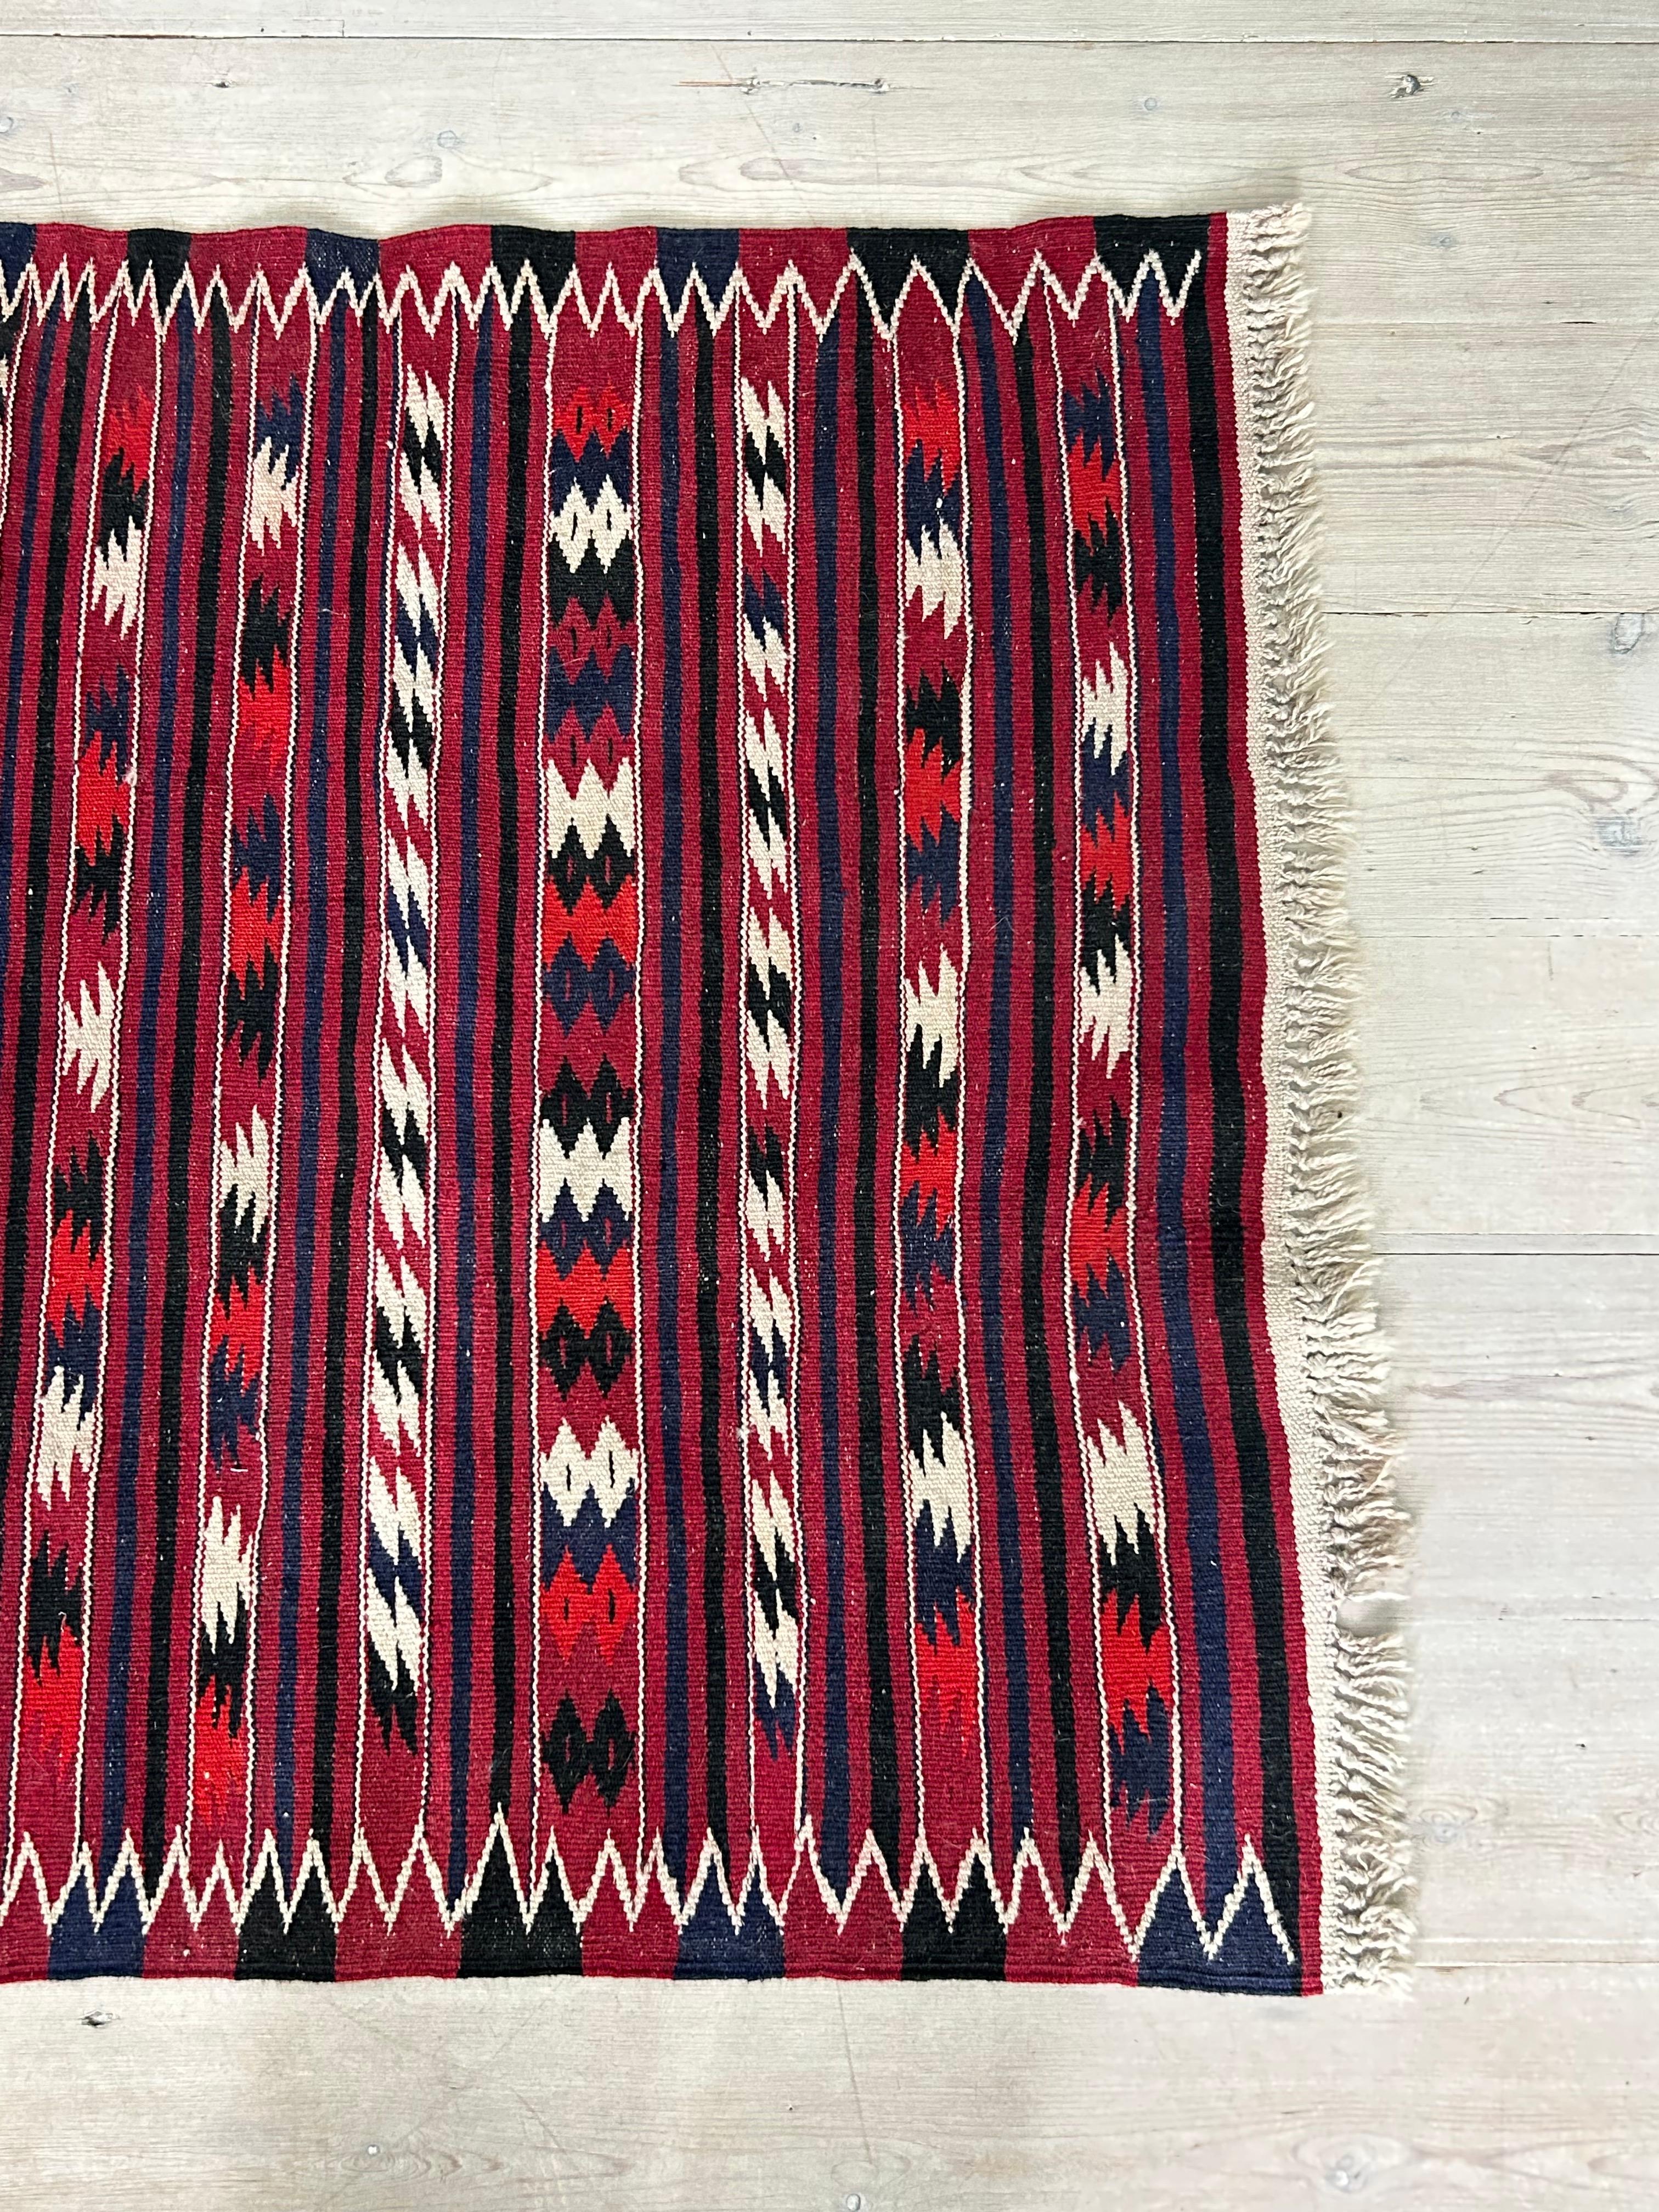 Vintage Hand-Woven Oriental Red Striped Kelim Rug, 20th Century For Sale 2